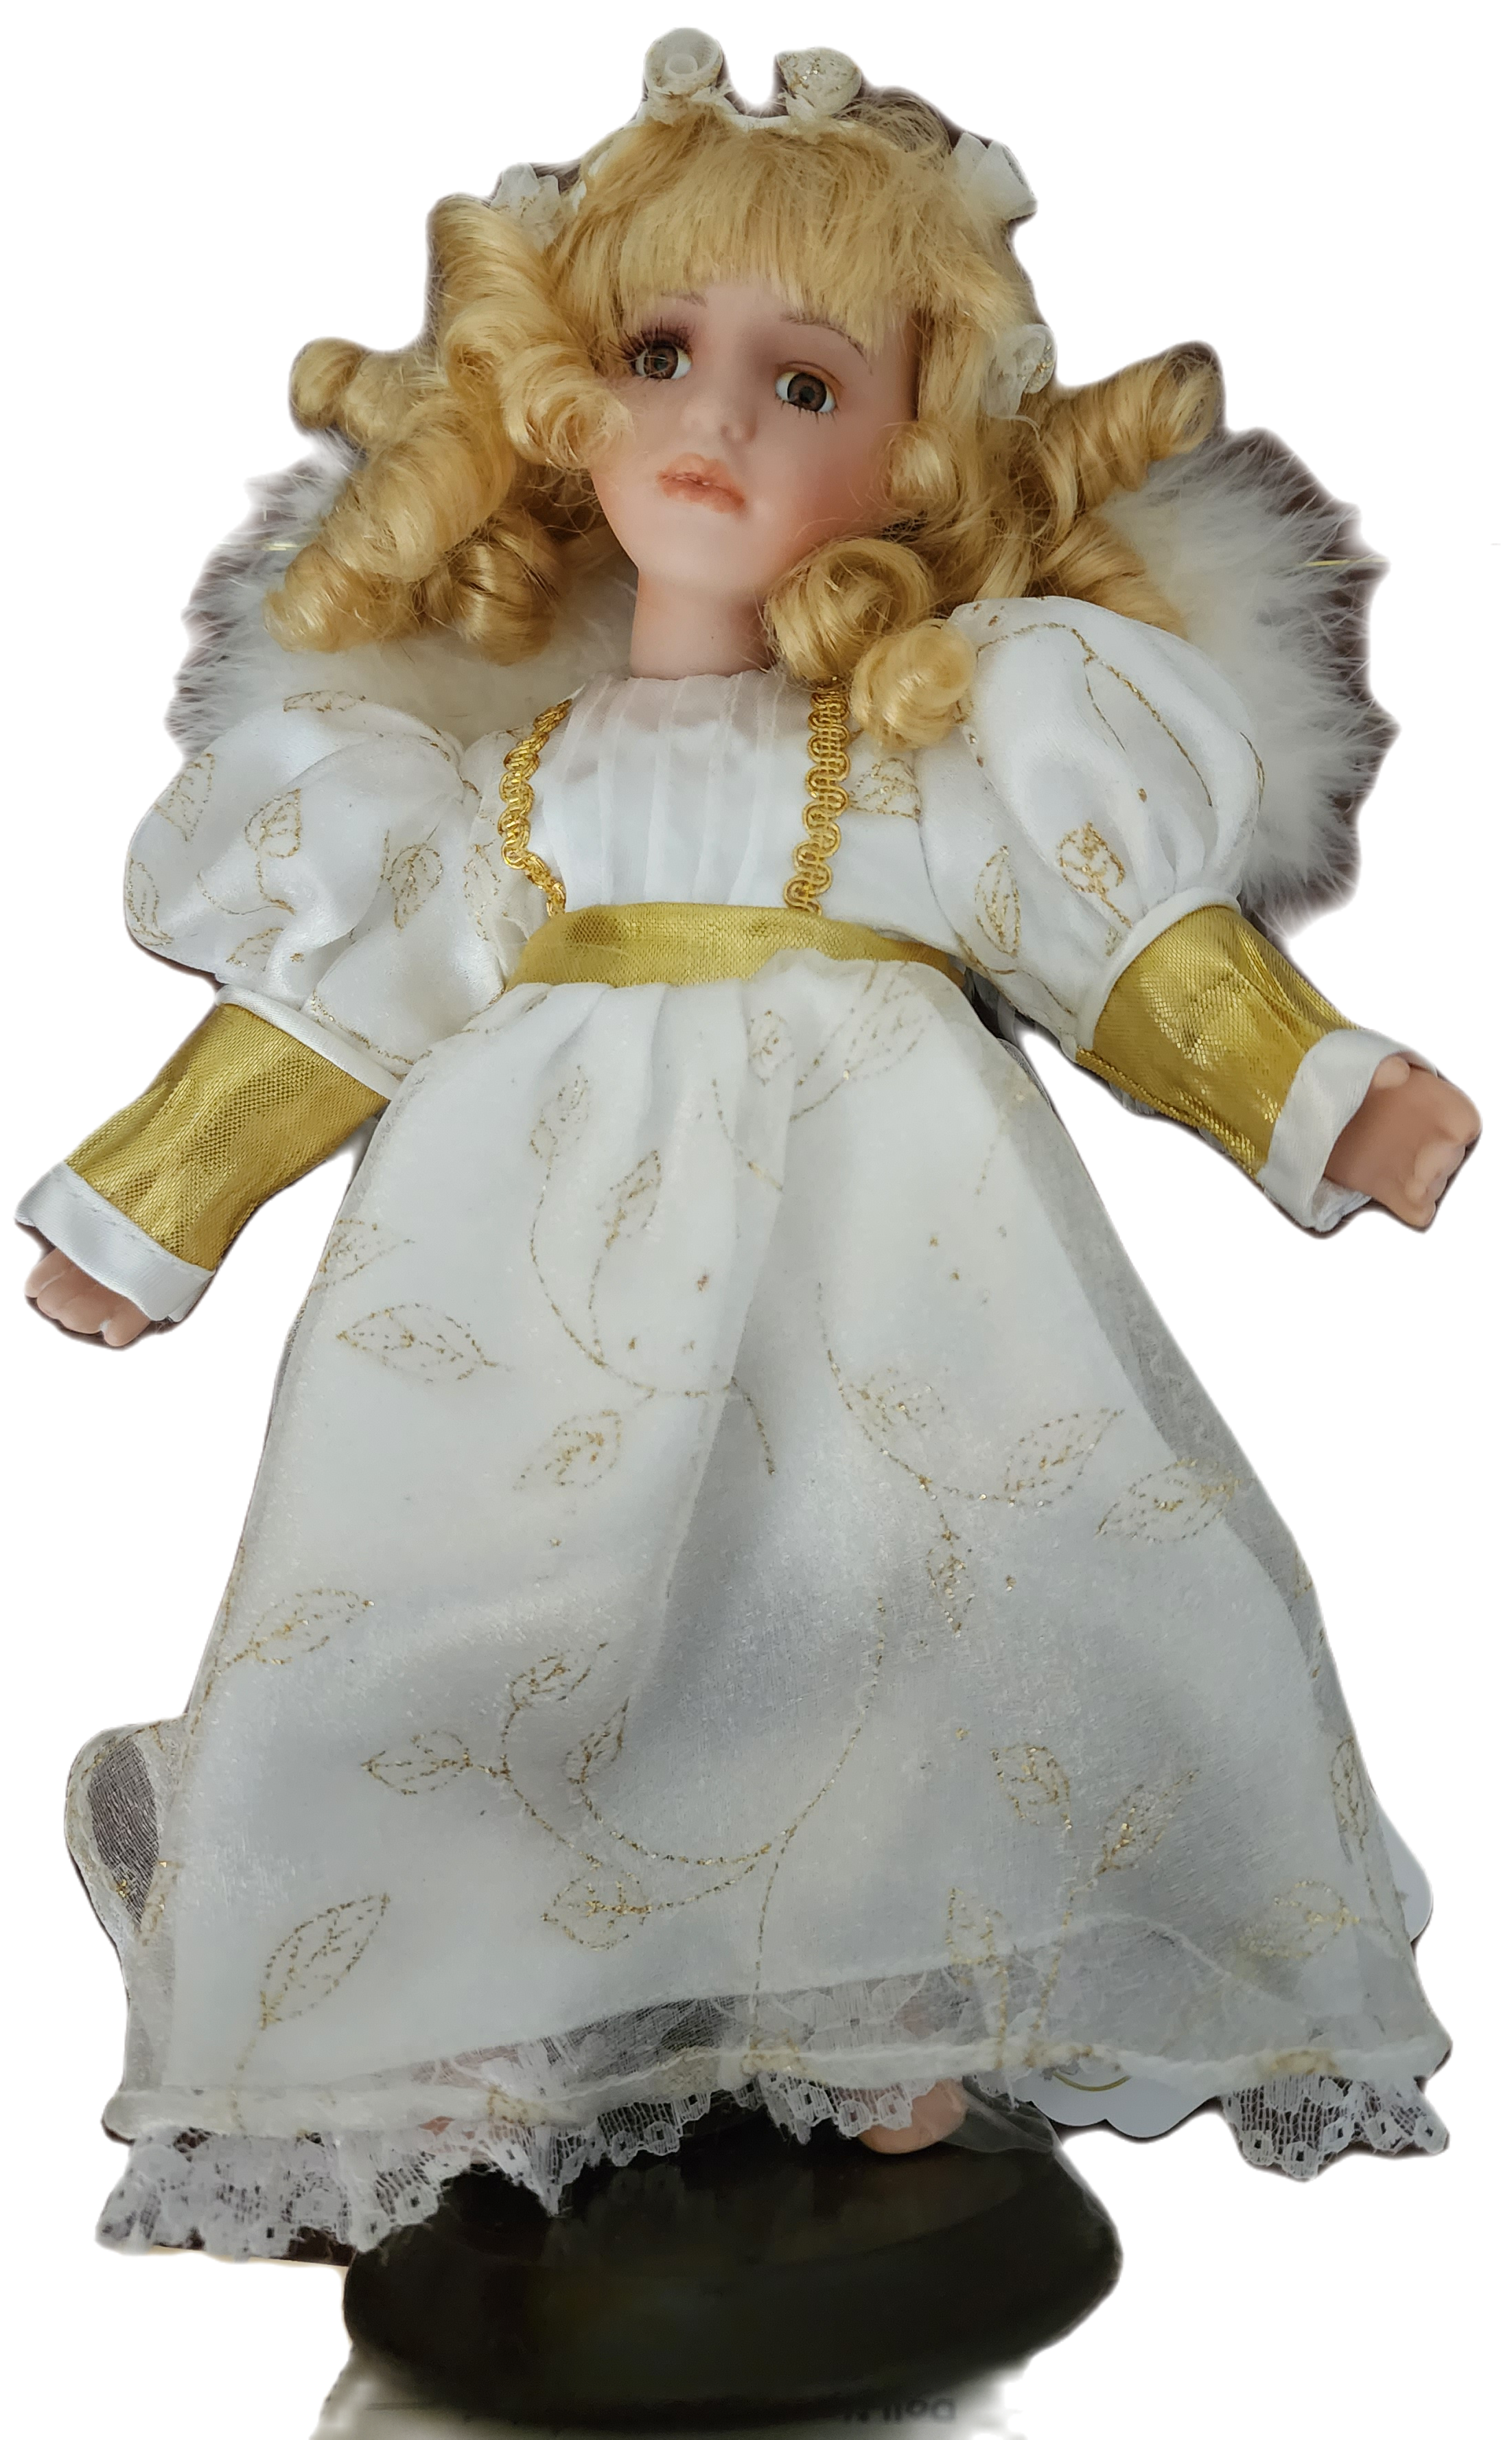 Harlow - Lightworker Spirit Attached to Angel Doll Vessel